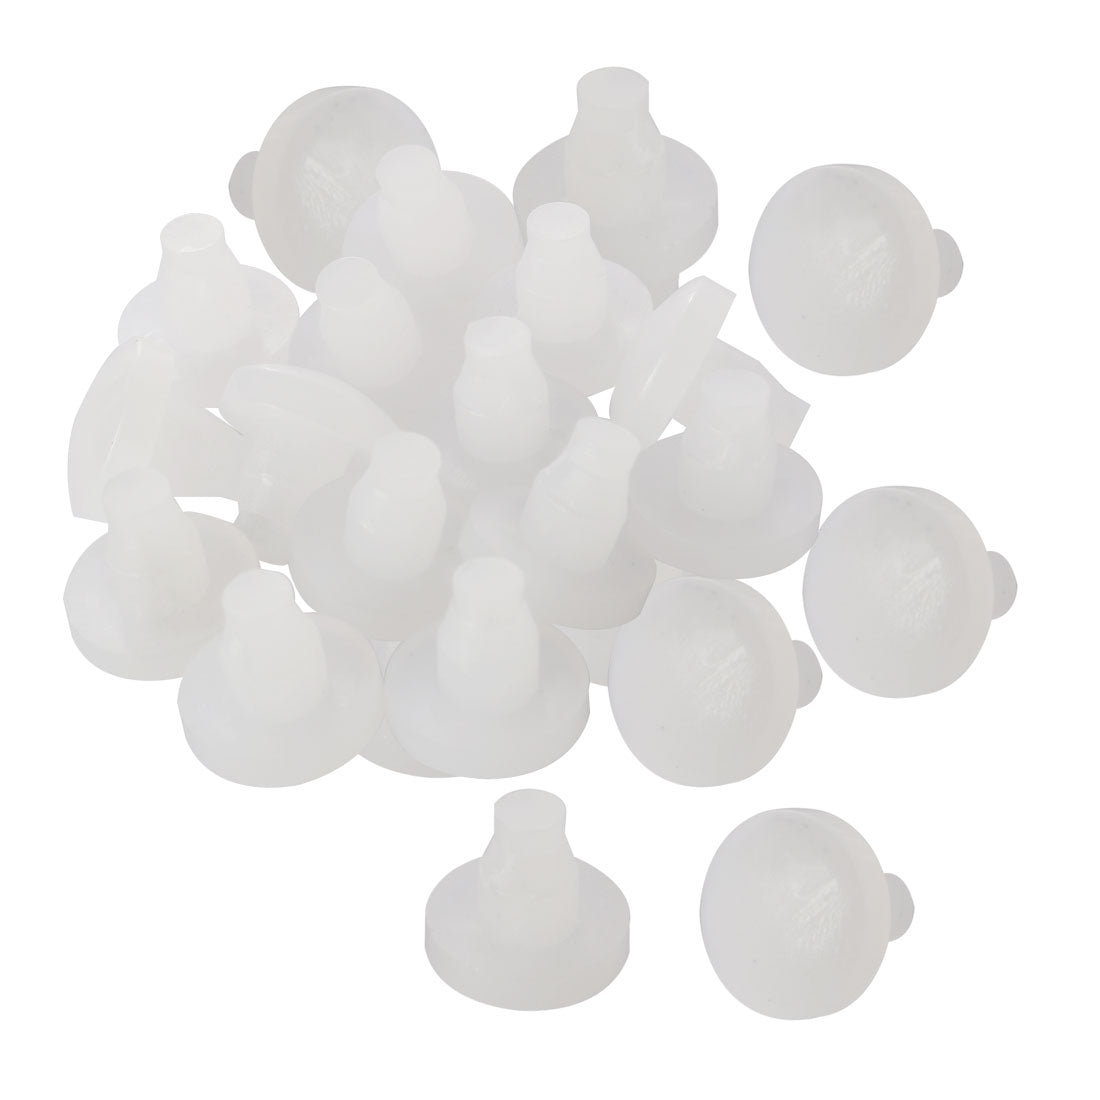 uxcell Uxcell 25pcs 7mm White Stem Bumpers Glide, Patio Outdoor Furniture Glass Table Top Anti-collision Embedded